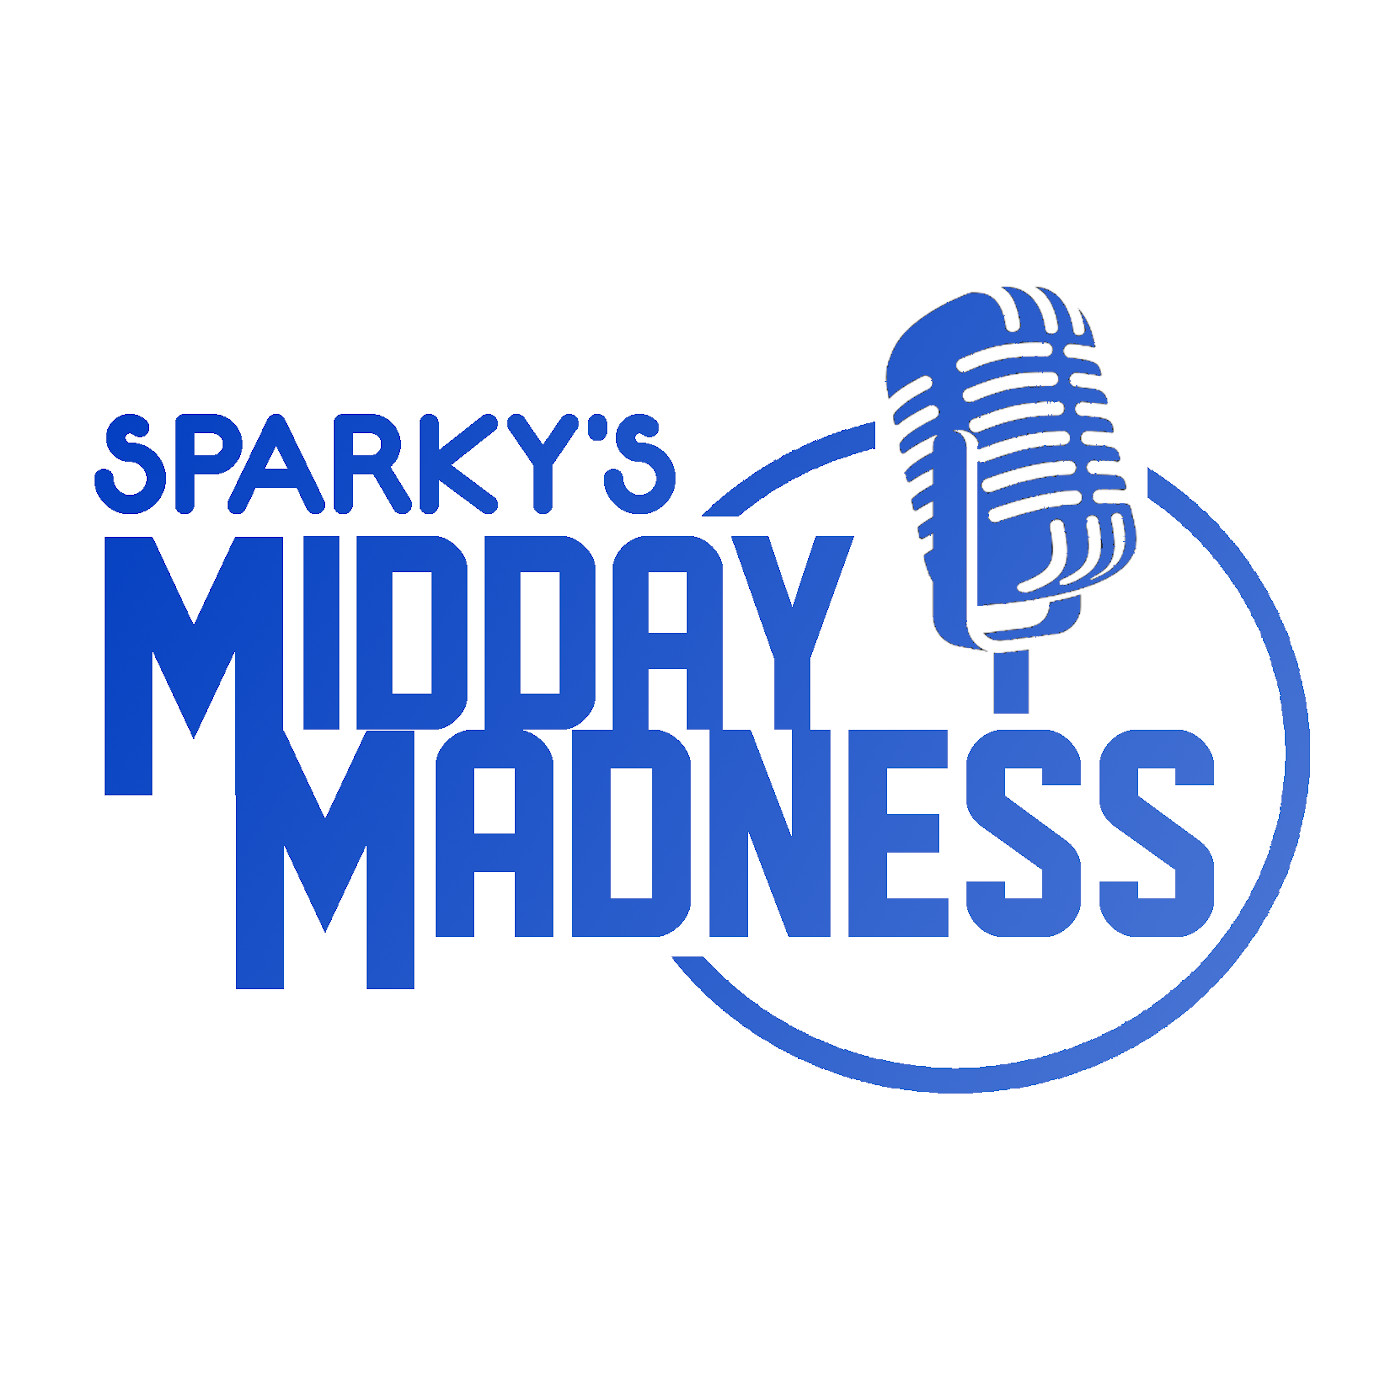 8-4-22 Sparky's Midday Madness